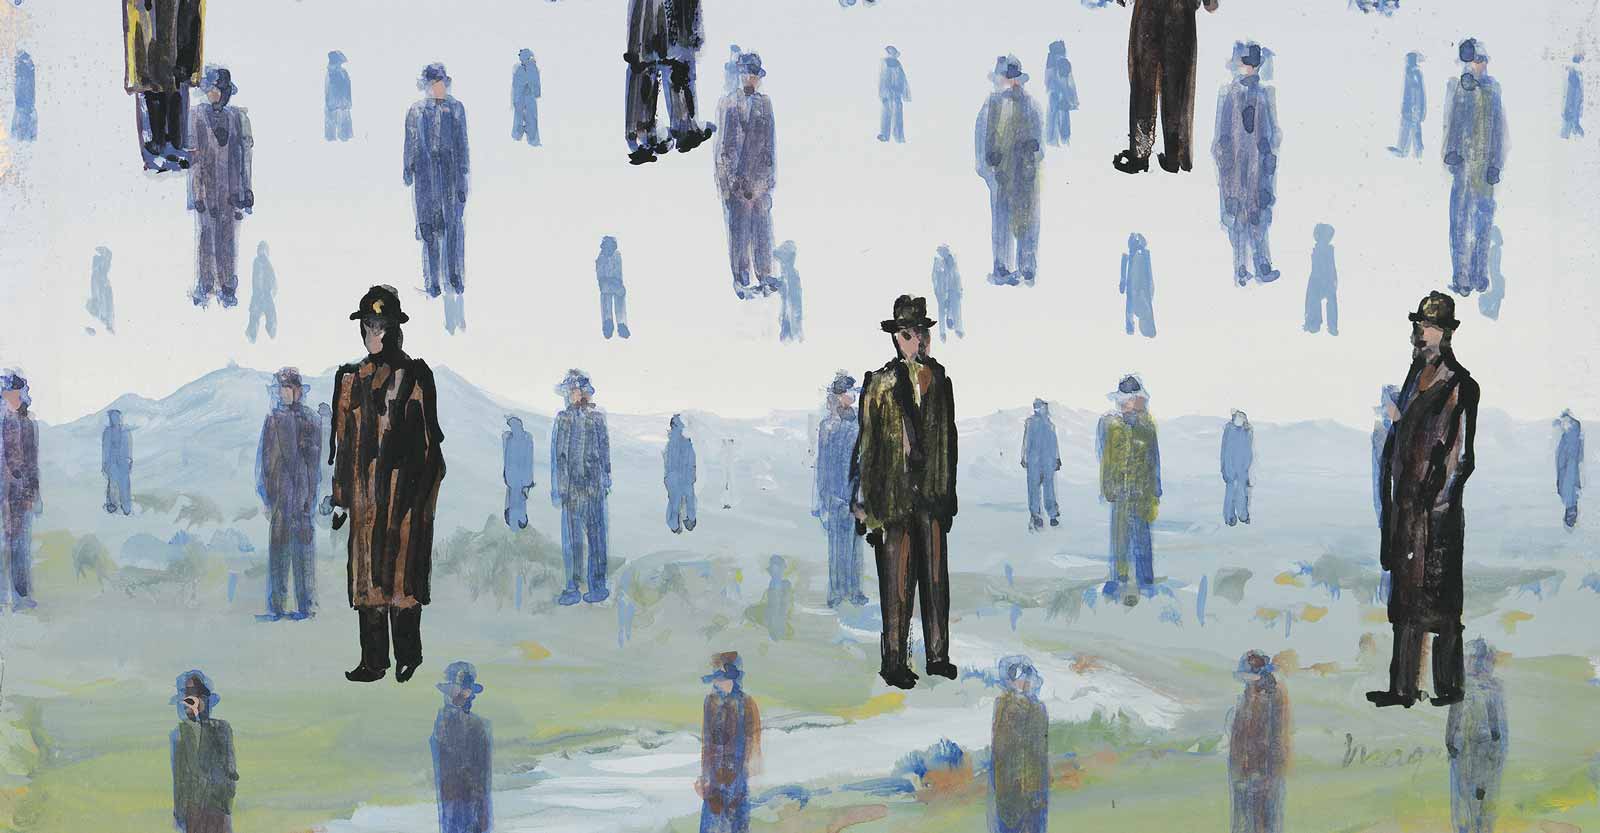 The Magical Paintings of René Magritte